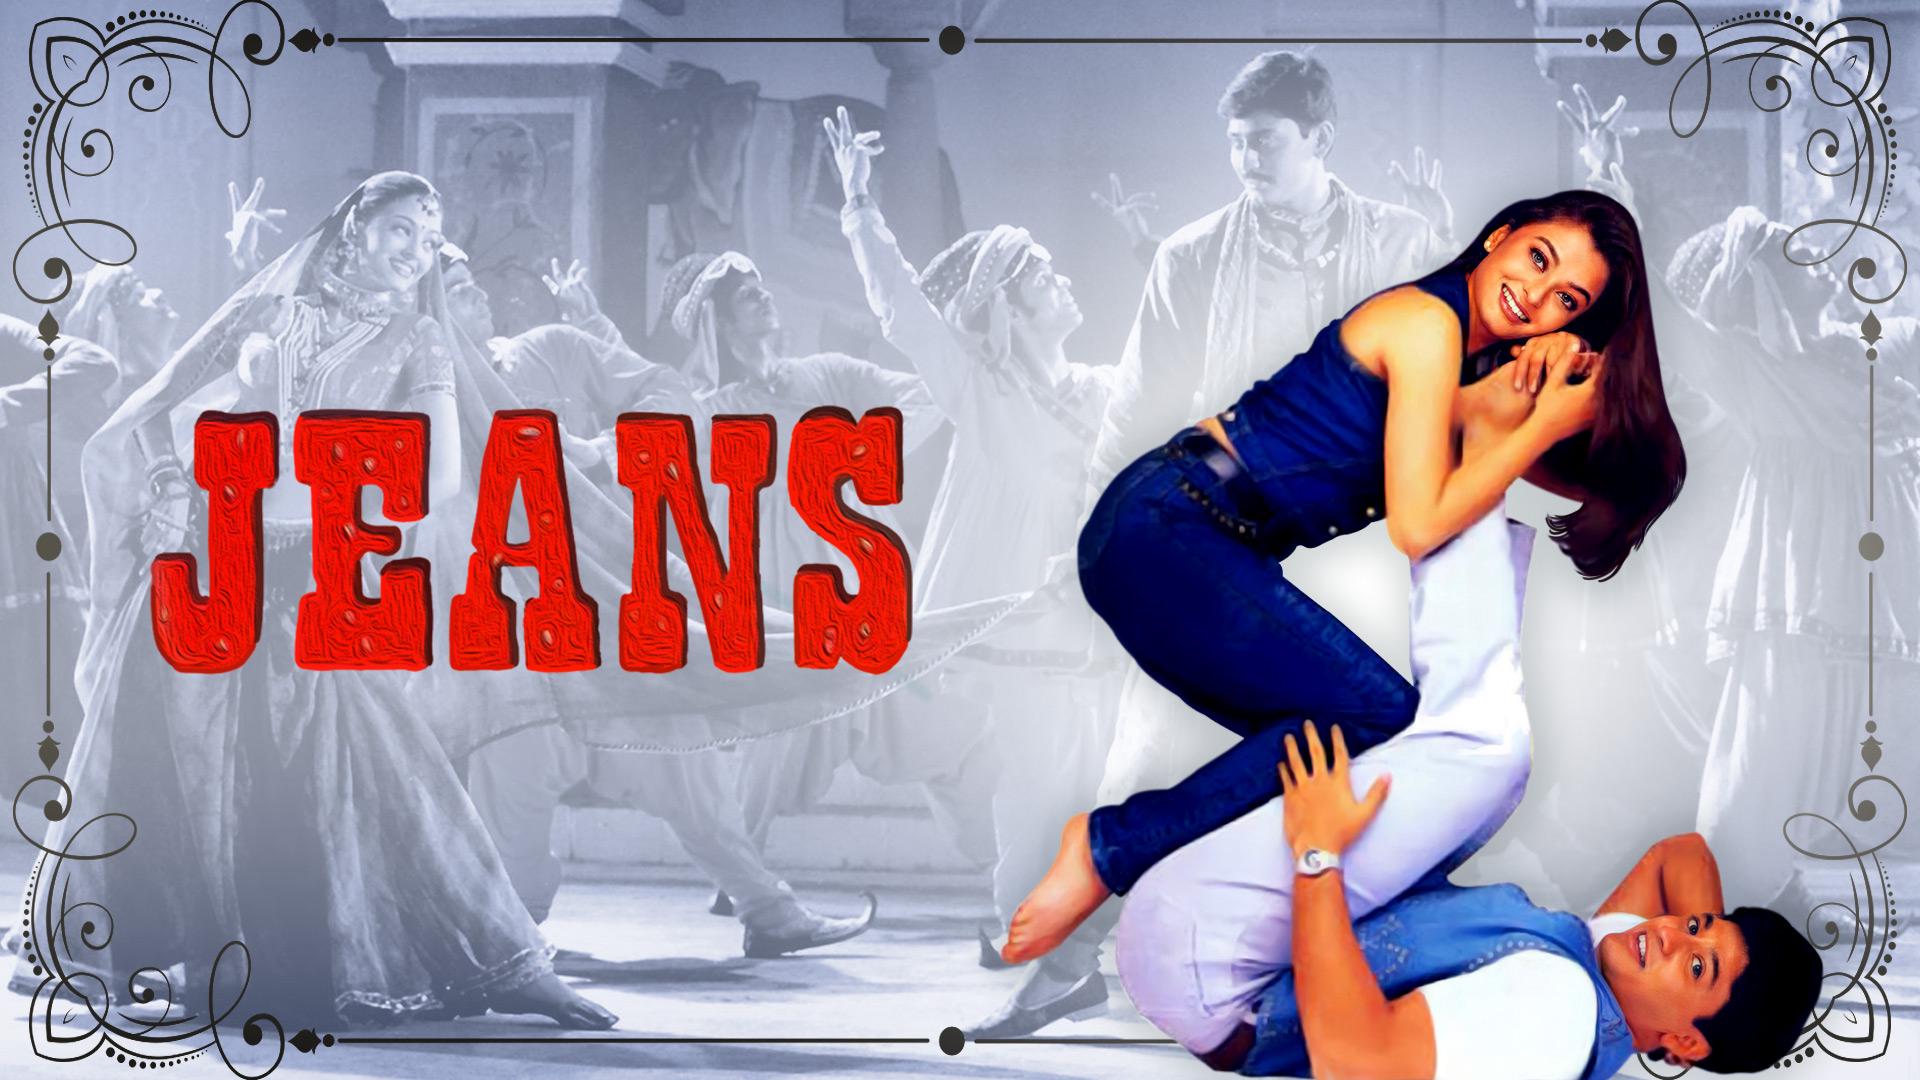 carol bristow recommends jeans tamil full movie pic